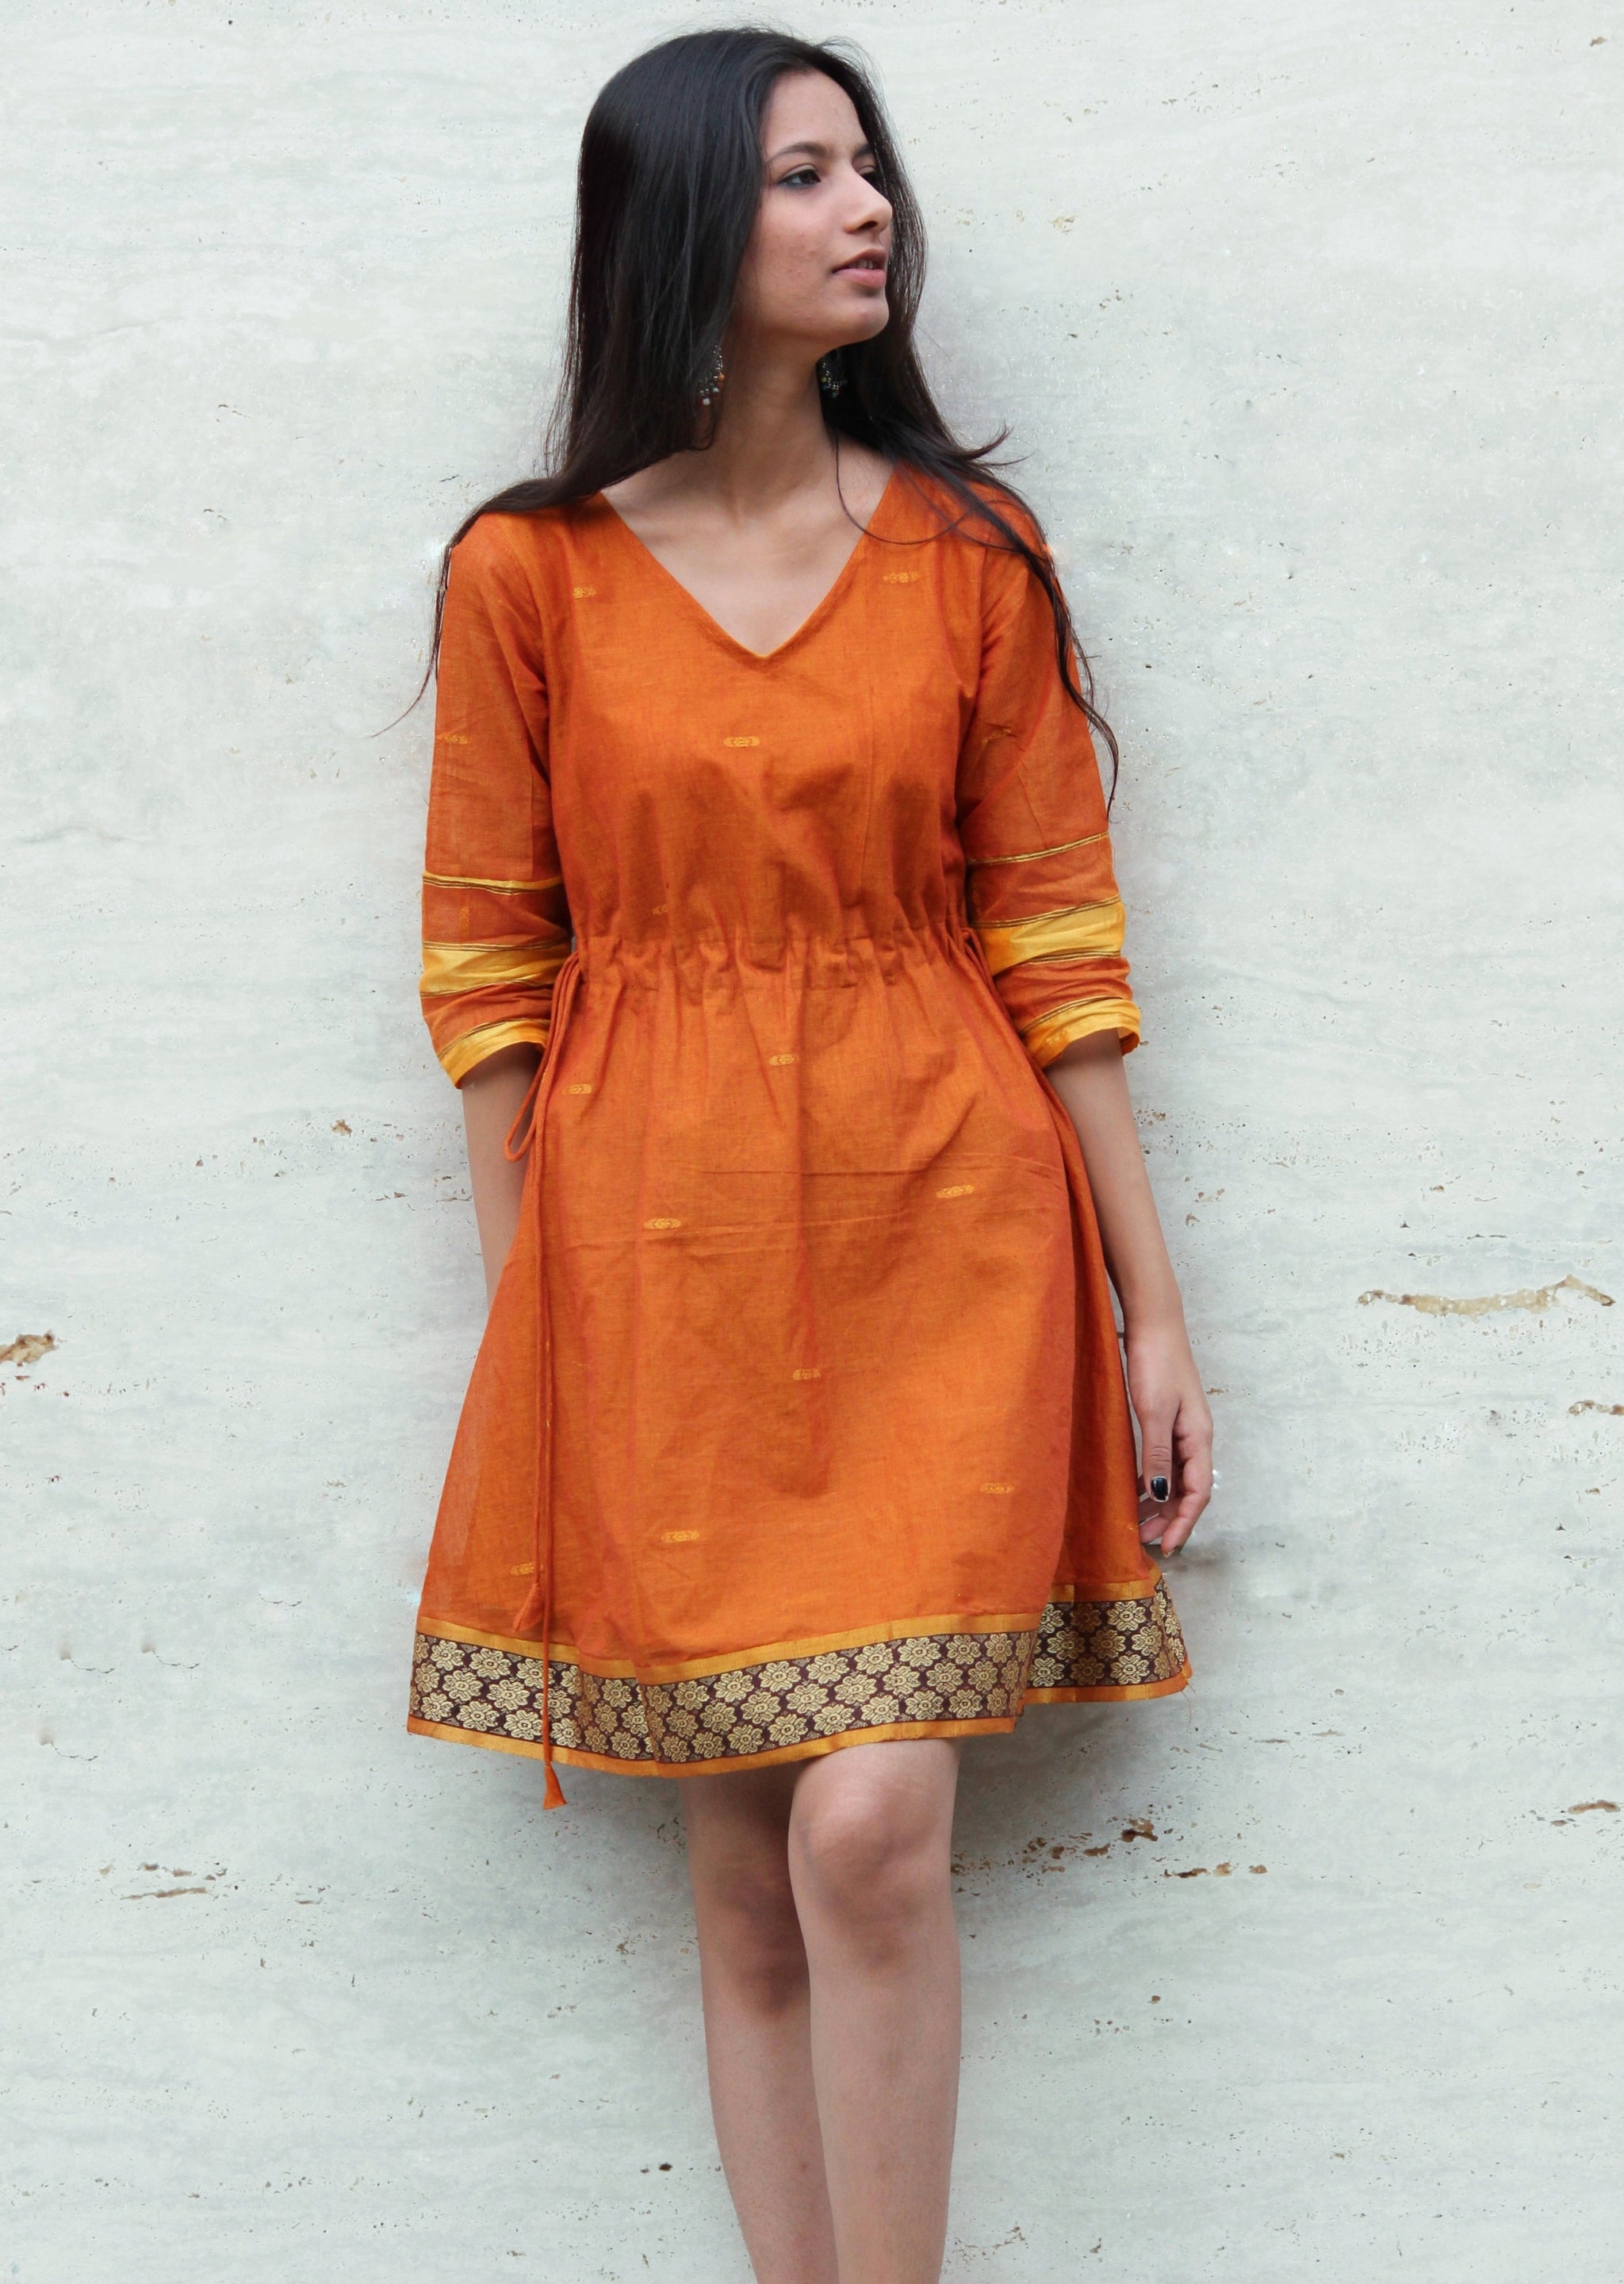 COS - Our kaftan-inspired drawstring dress is crafted from